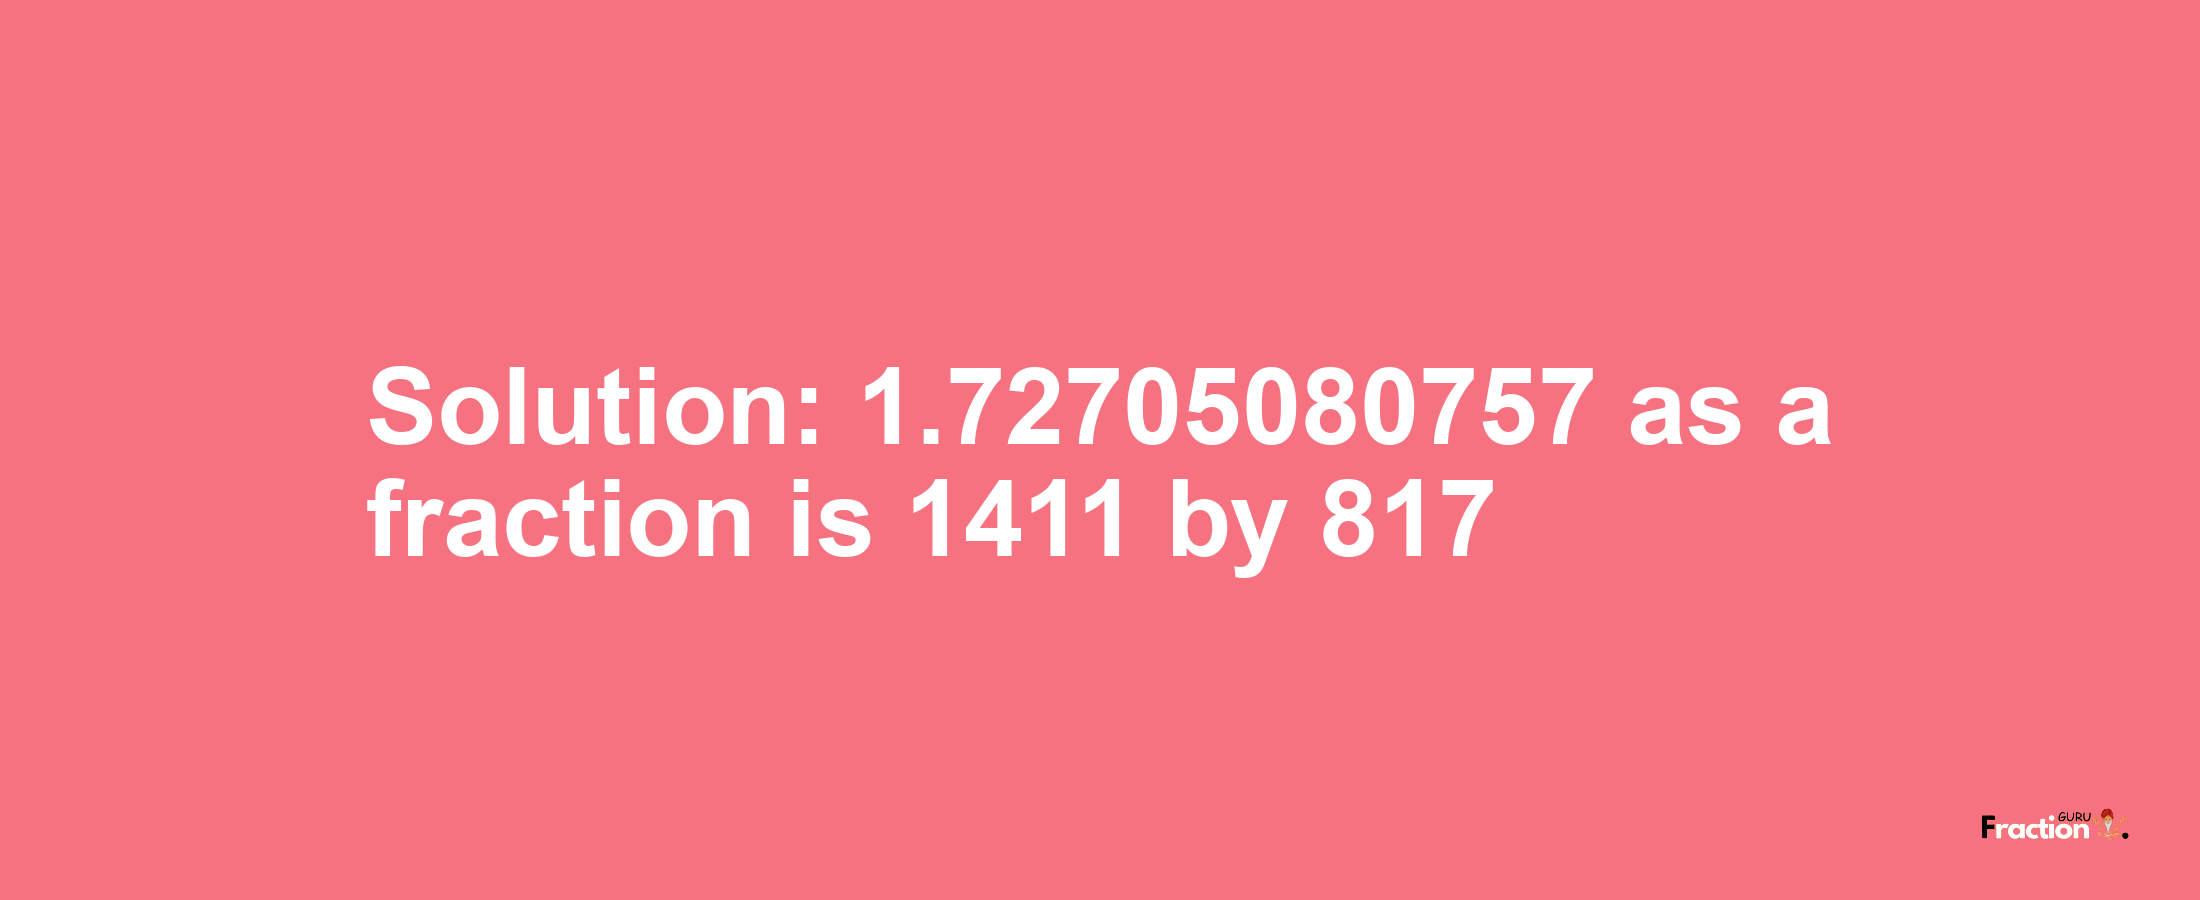 Solution:1.72705080757 as a fraction is 1411/817